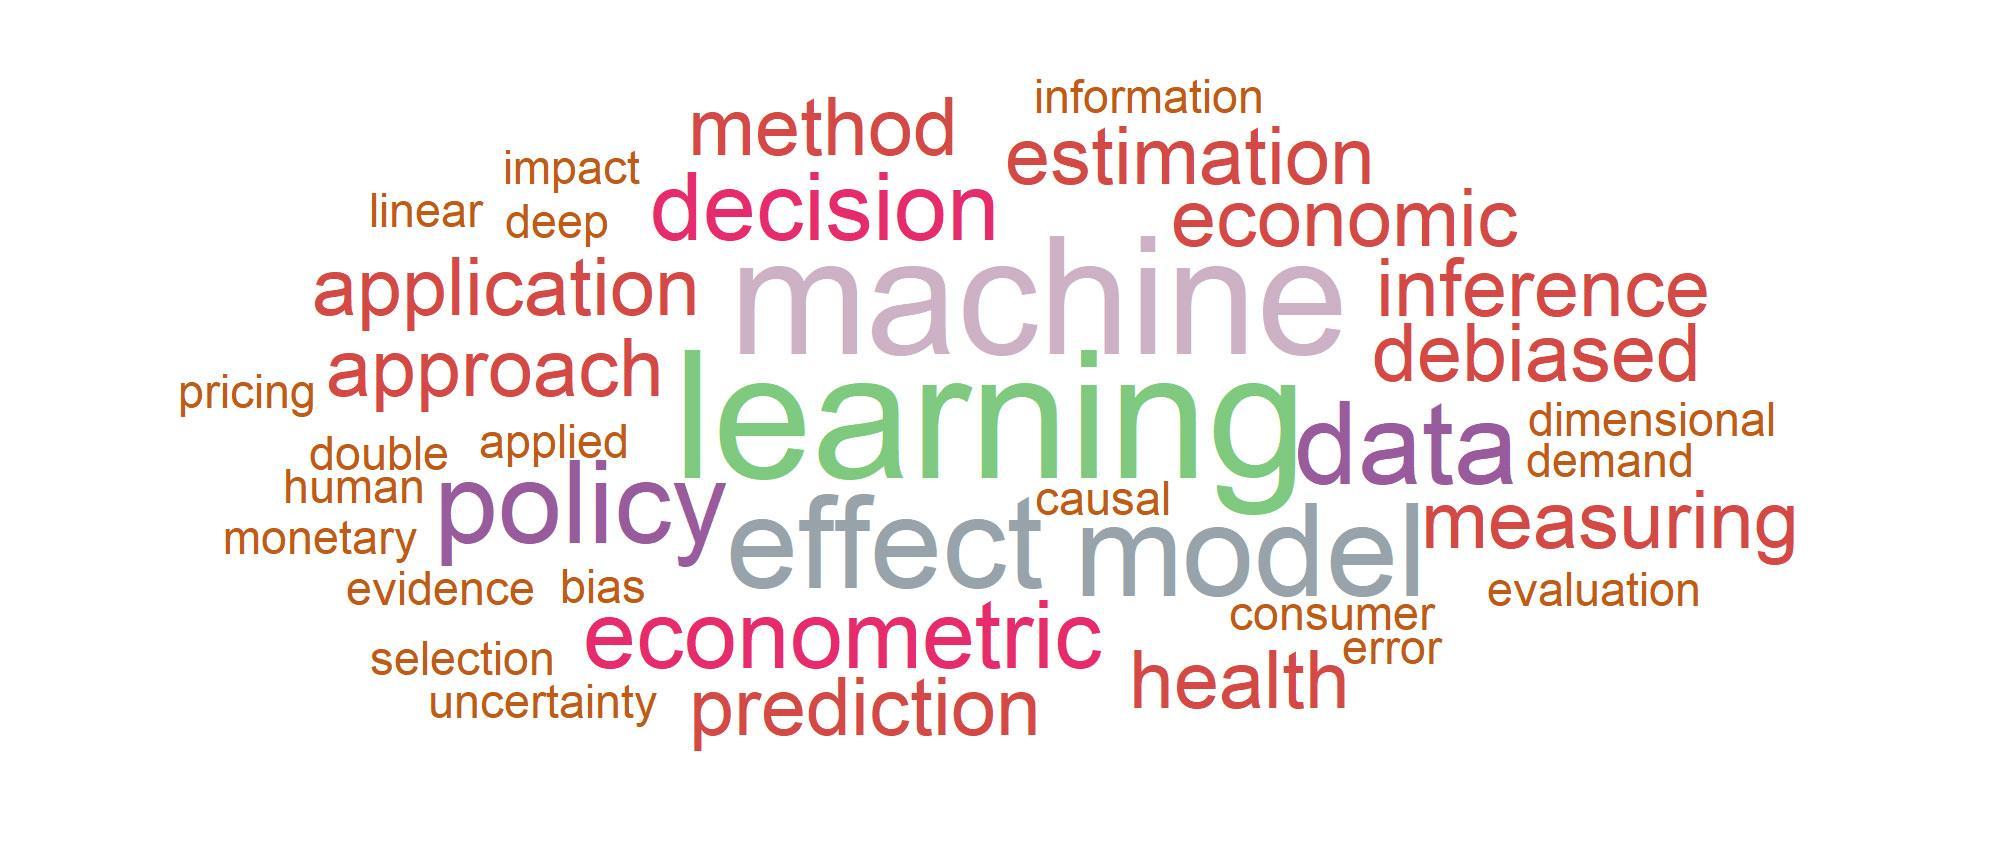 Word cloud with the following words in order of prominence: machine, learning; effect, model; data, policy; decision, econometric; estimation, economic, inference, debiased, measuring, health, prediction, approach, application, method; bias, causal, consumer, error, evaluation, demand, dimensional, information, impact, deep, linear, pricing, applied, double, human, monetary, evidence, selection, uncertainty.